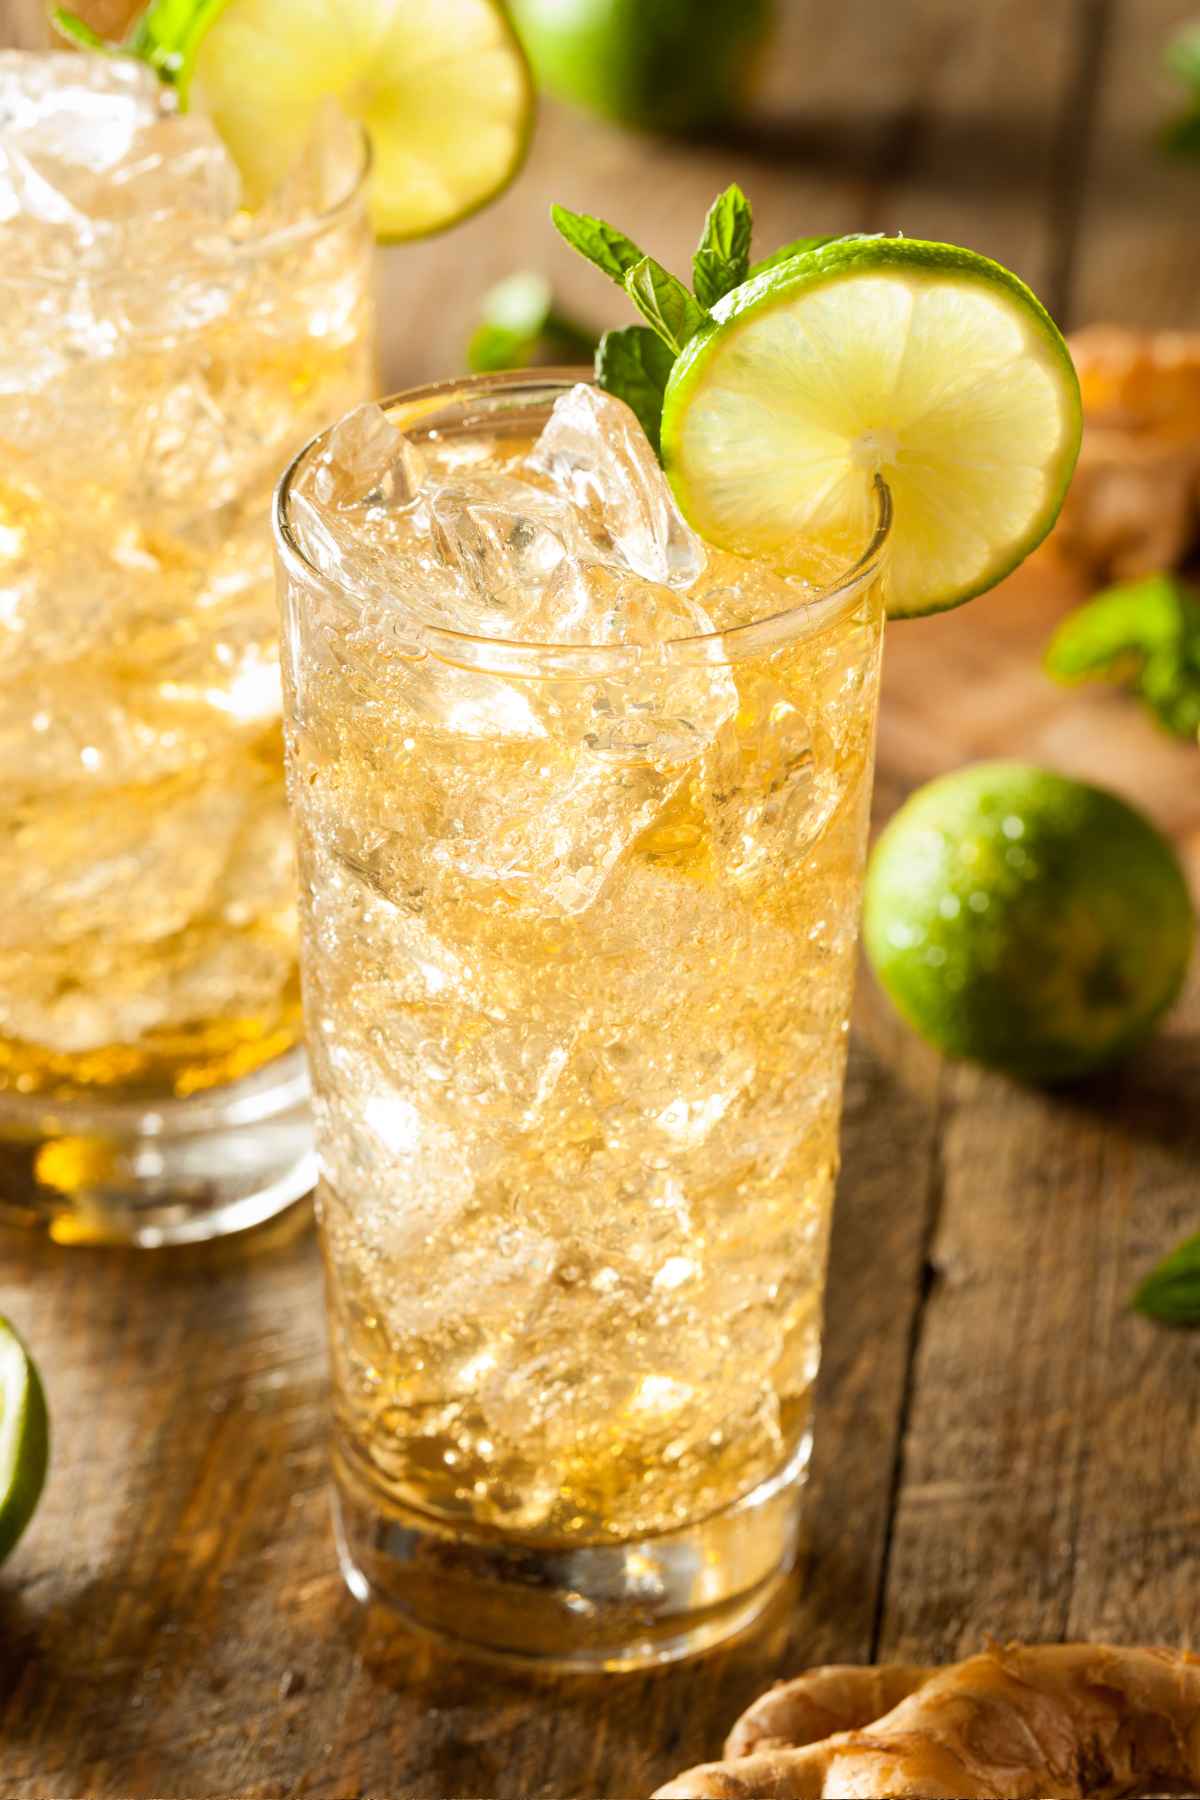 Ginger beer is a popular beverage known for its refreshing, zesty flavor and its association with cocktails like the Moscow Mule and Dark 'n' Stormy. Many people wonder “Does ginger beer have alcohol”, especially since it shares its name with ginger ale, a non-alcoholic soda.